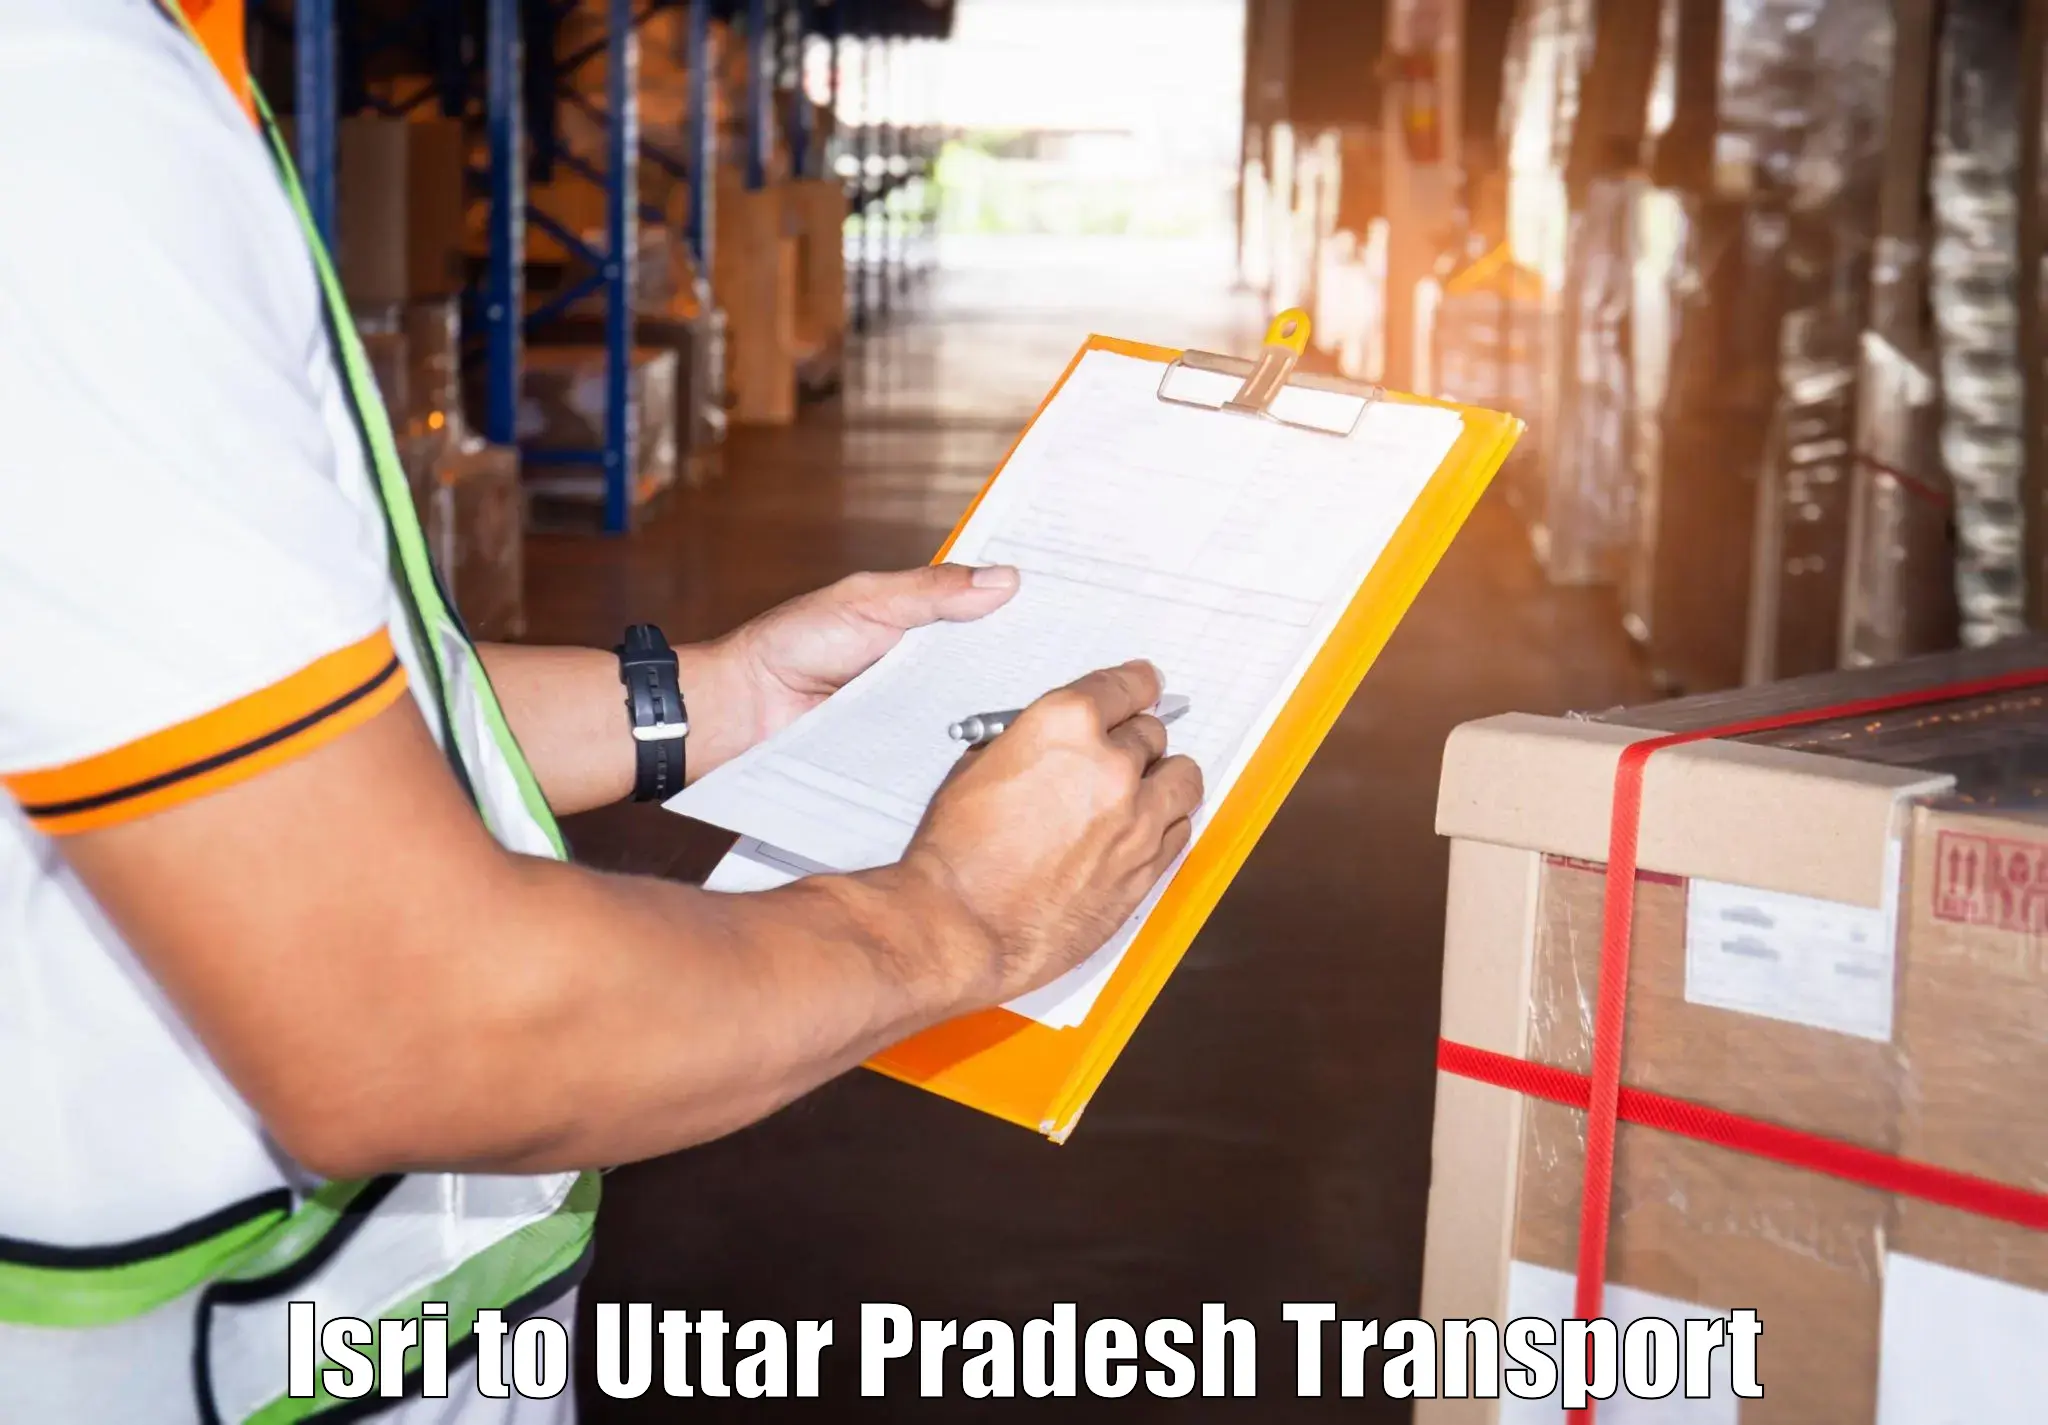 Goods delivery service Isri to Salemgarh